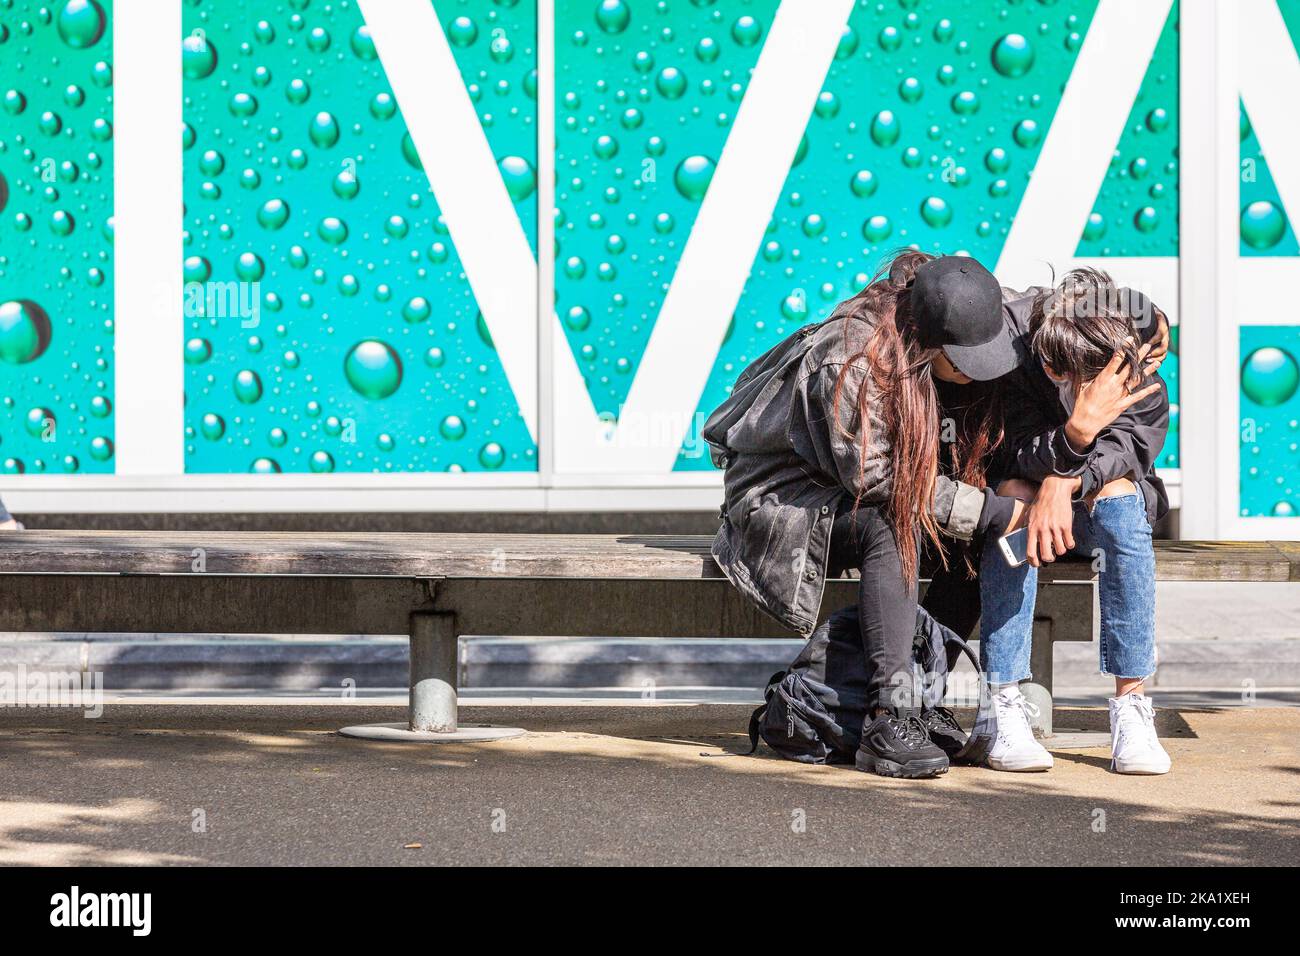 Pain and comfort: two figures seated on a bench, one afflicted, the other consoling the first. Brussels. Stock Photo